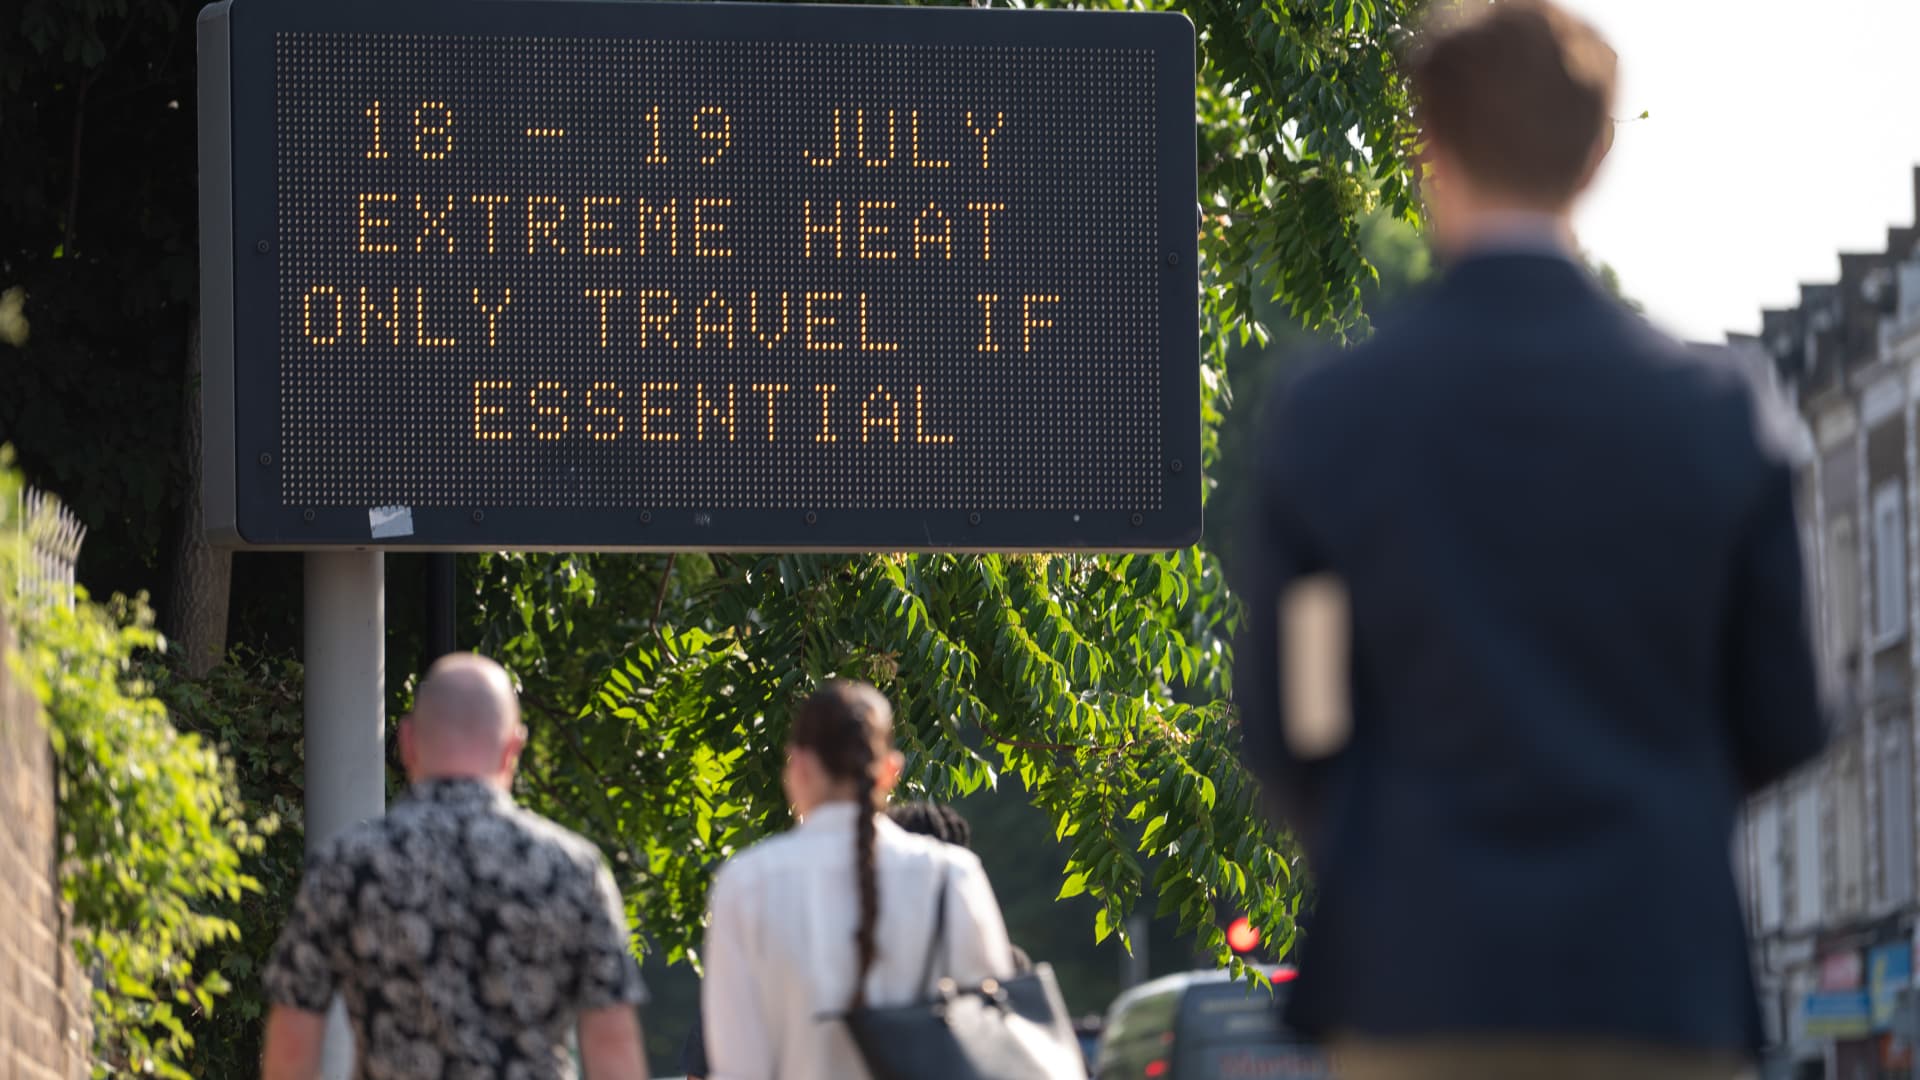 UK logs hottest day on record with temperature hitting 102.4 F